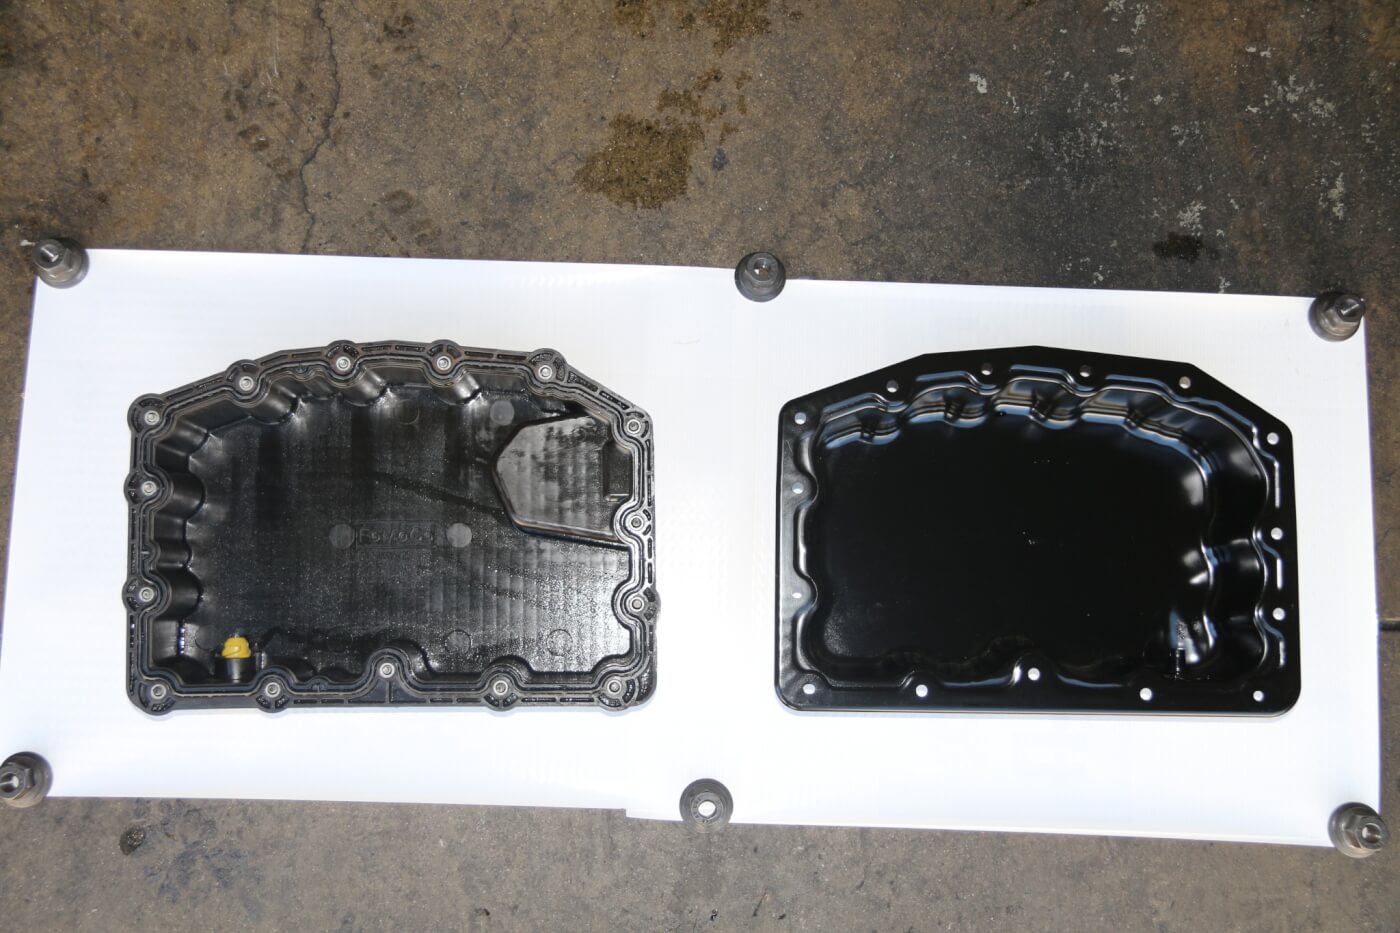 5. This view shows the inside of the composite pan (left) and the new stamped steel pan (right). Notice that the composite pan has an integrated gasket, making it a one-time use item. 